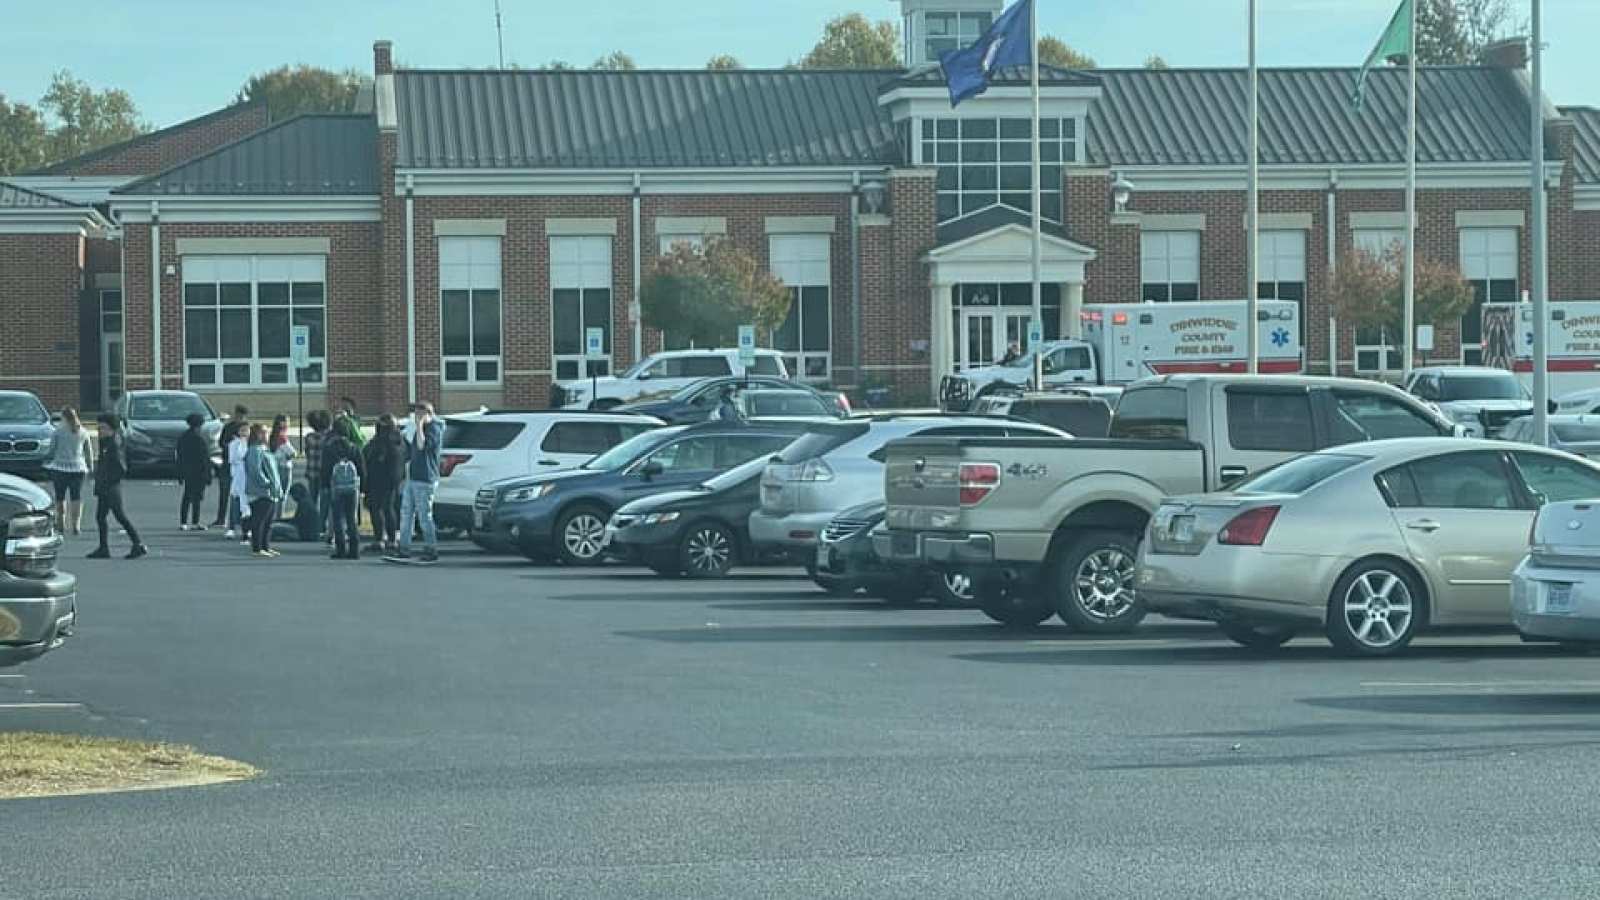 Dinwiddie High School fire update: 2 students released, 1 will be in hospital ‘for some time’